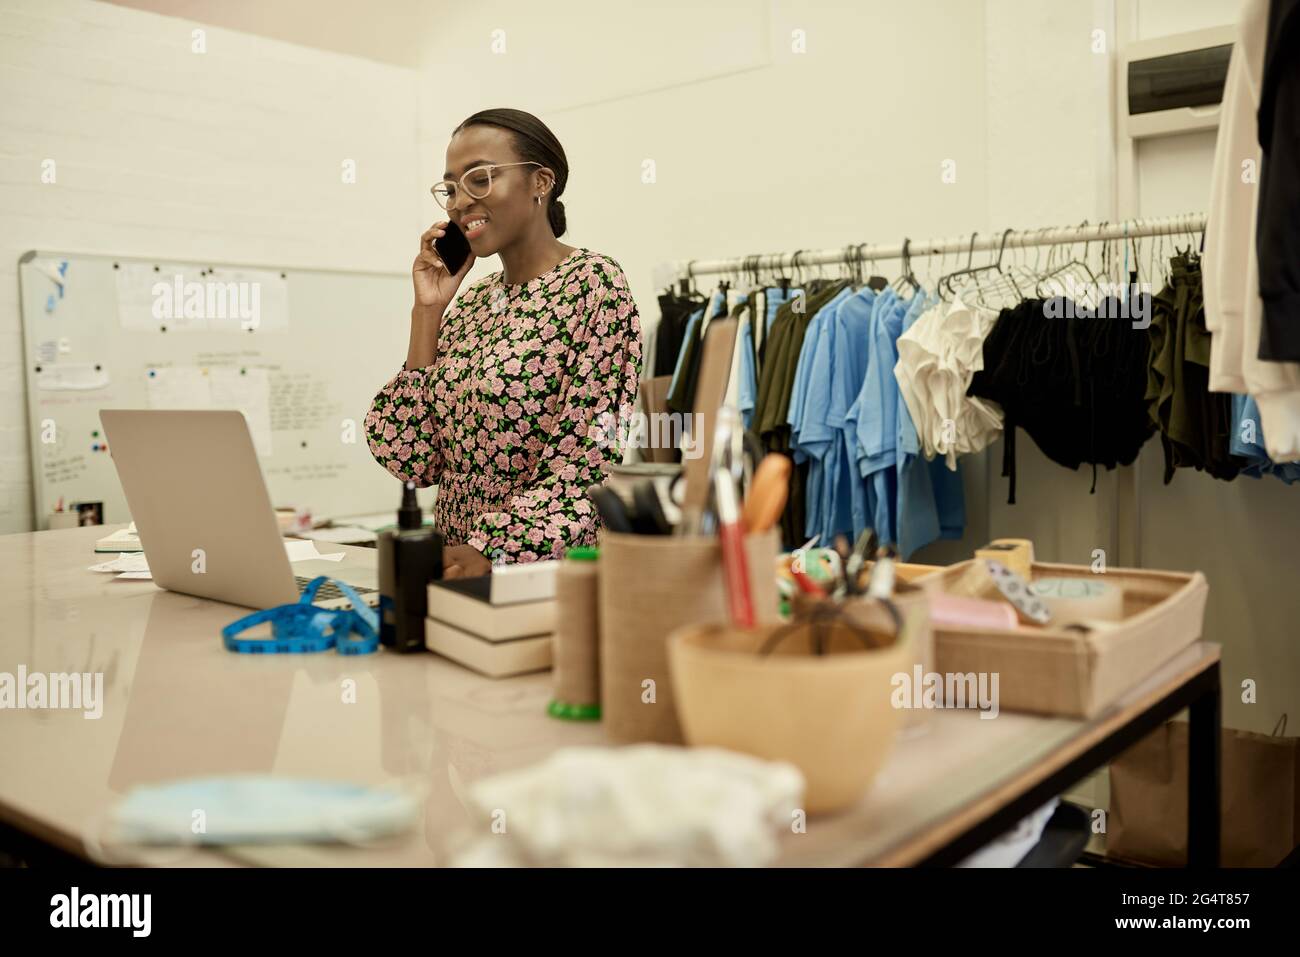 Smiling African female fashion designer talking on the phone in her workshop Stock Photo